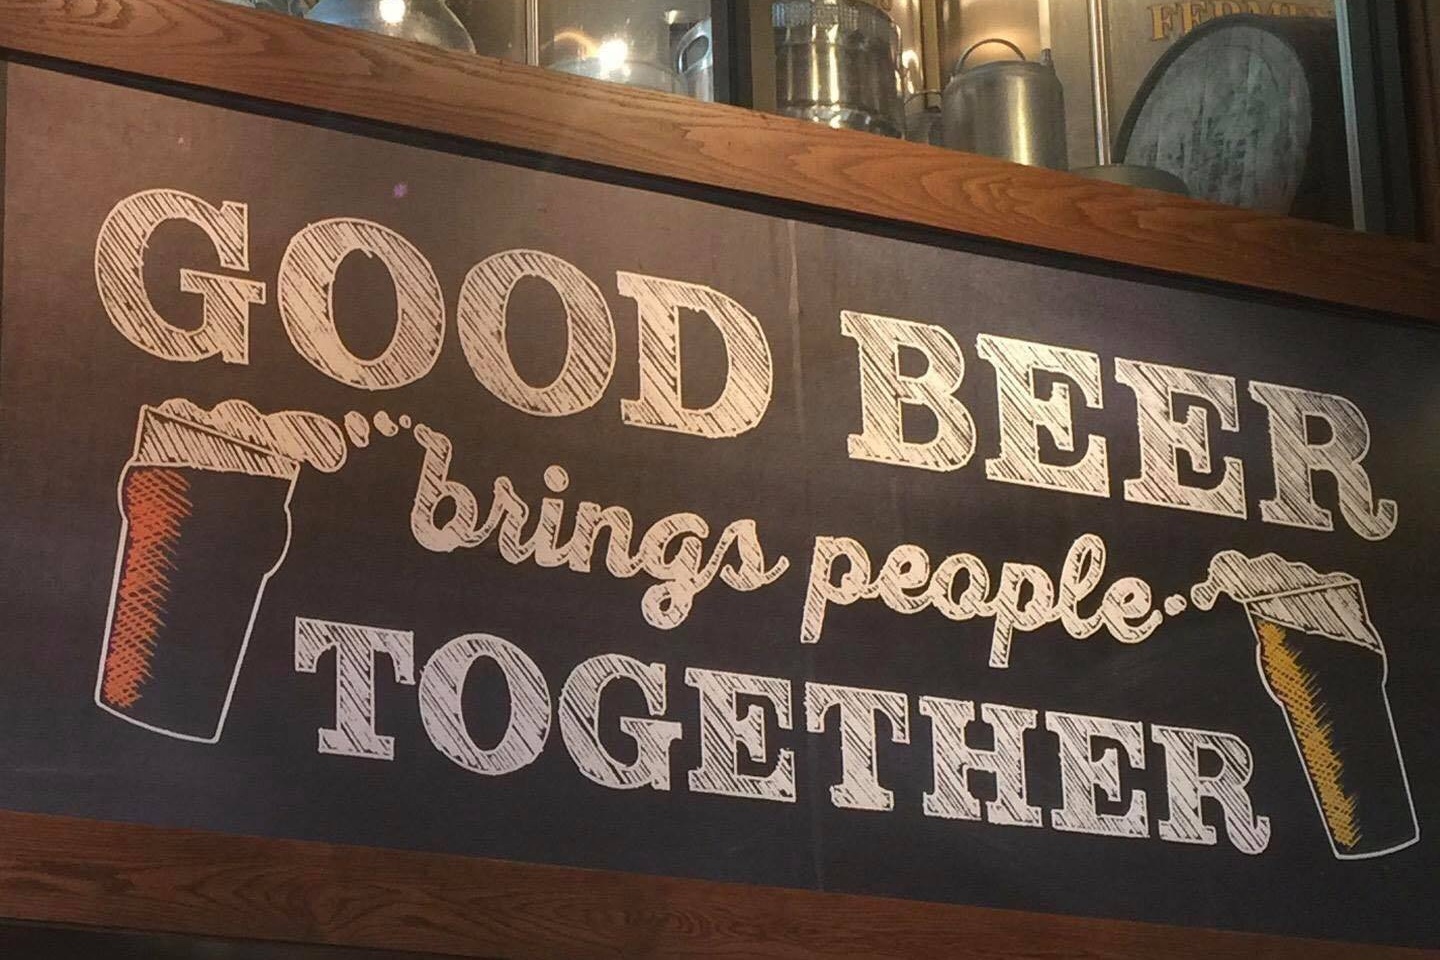 Sign reading: Good beer brings people together.